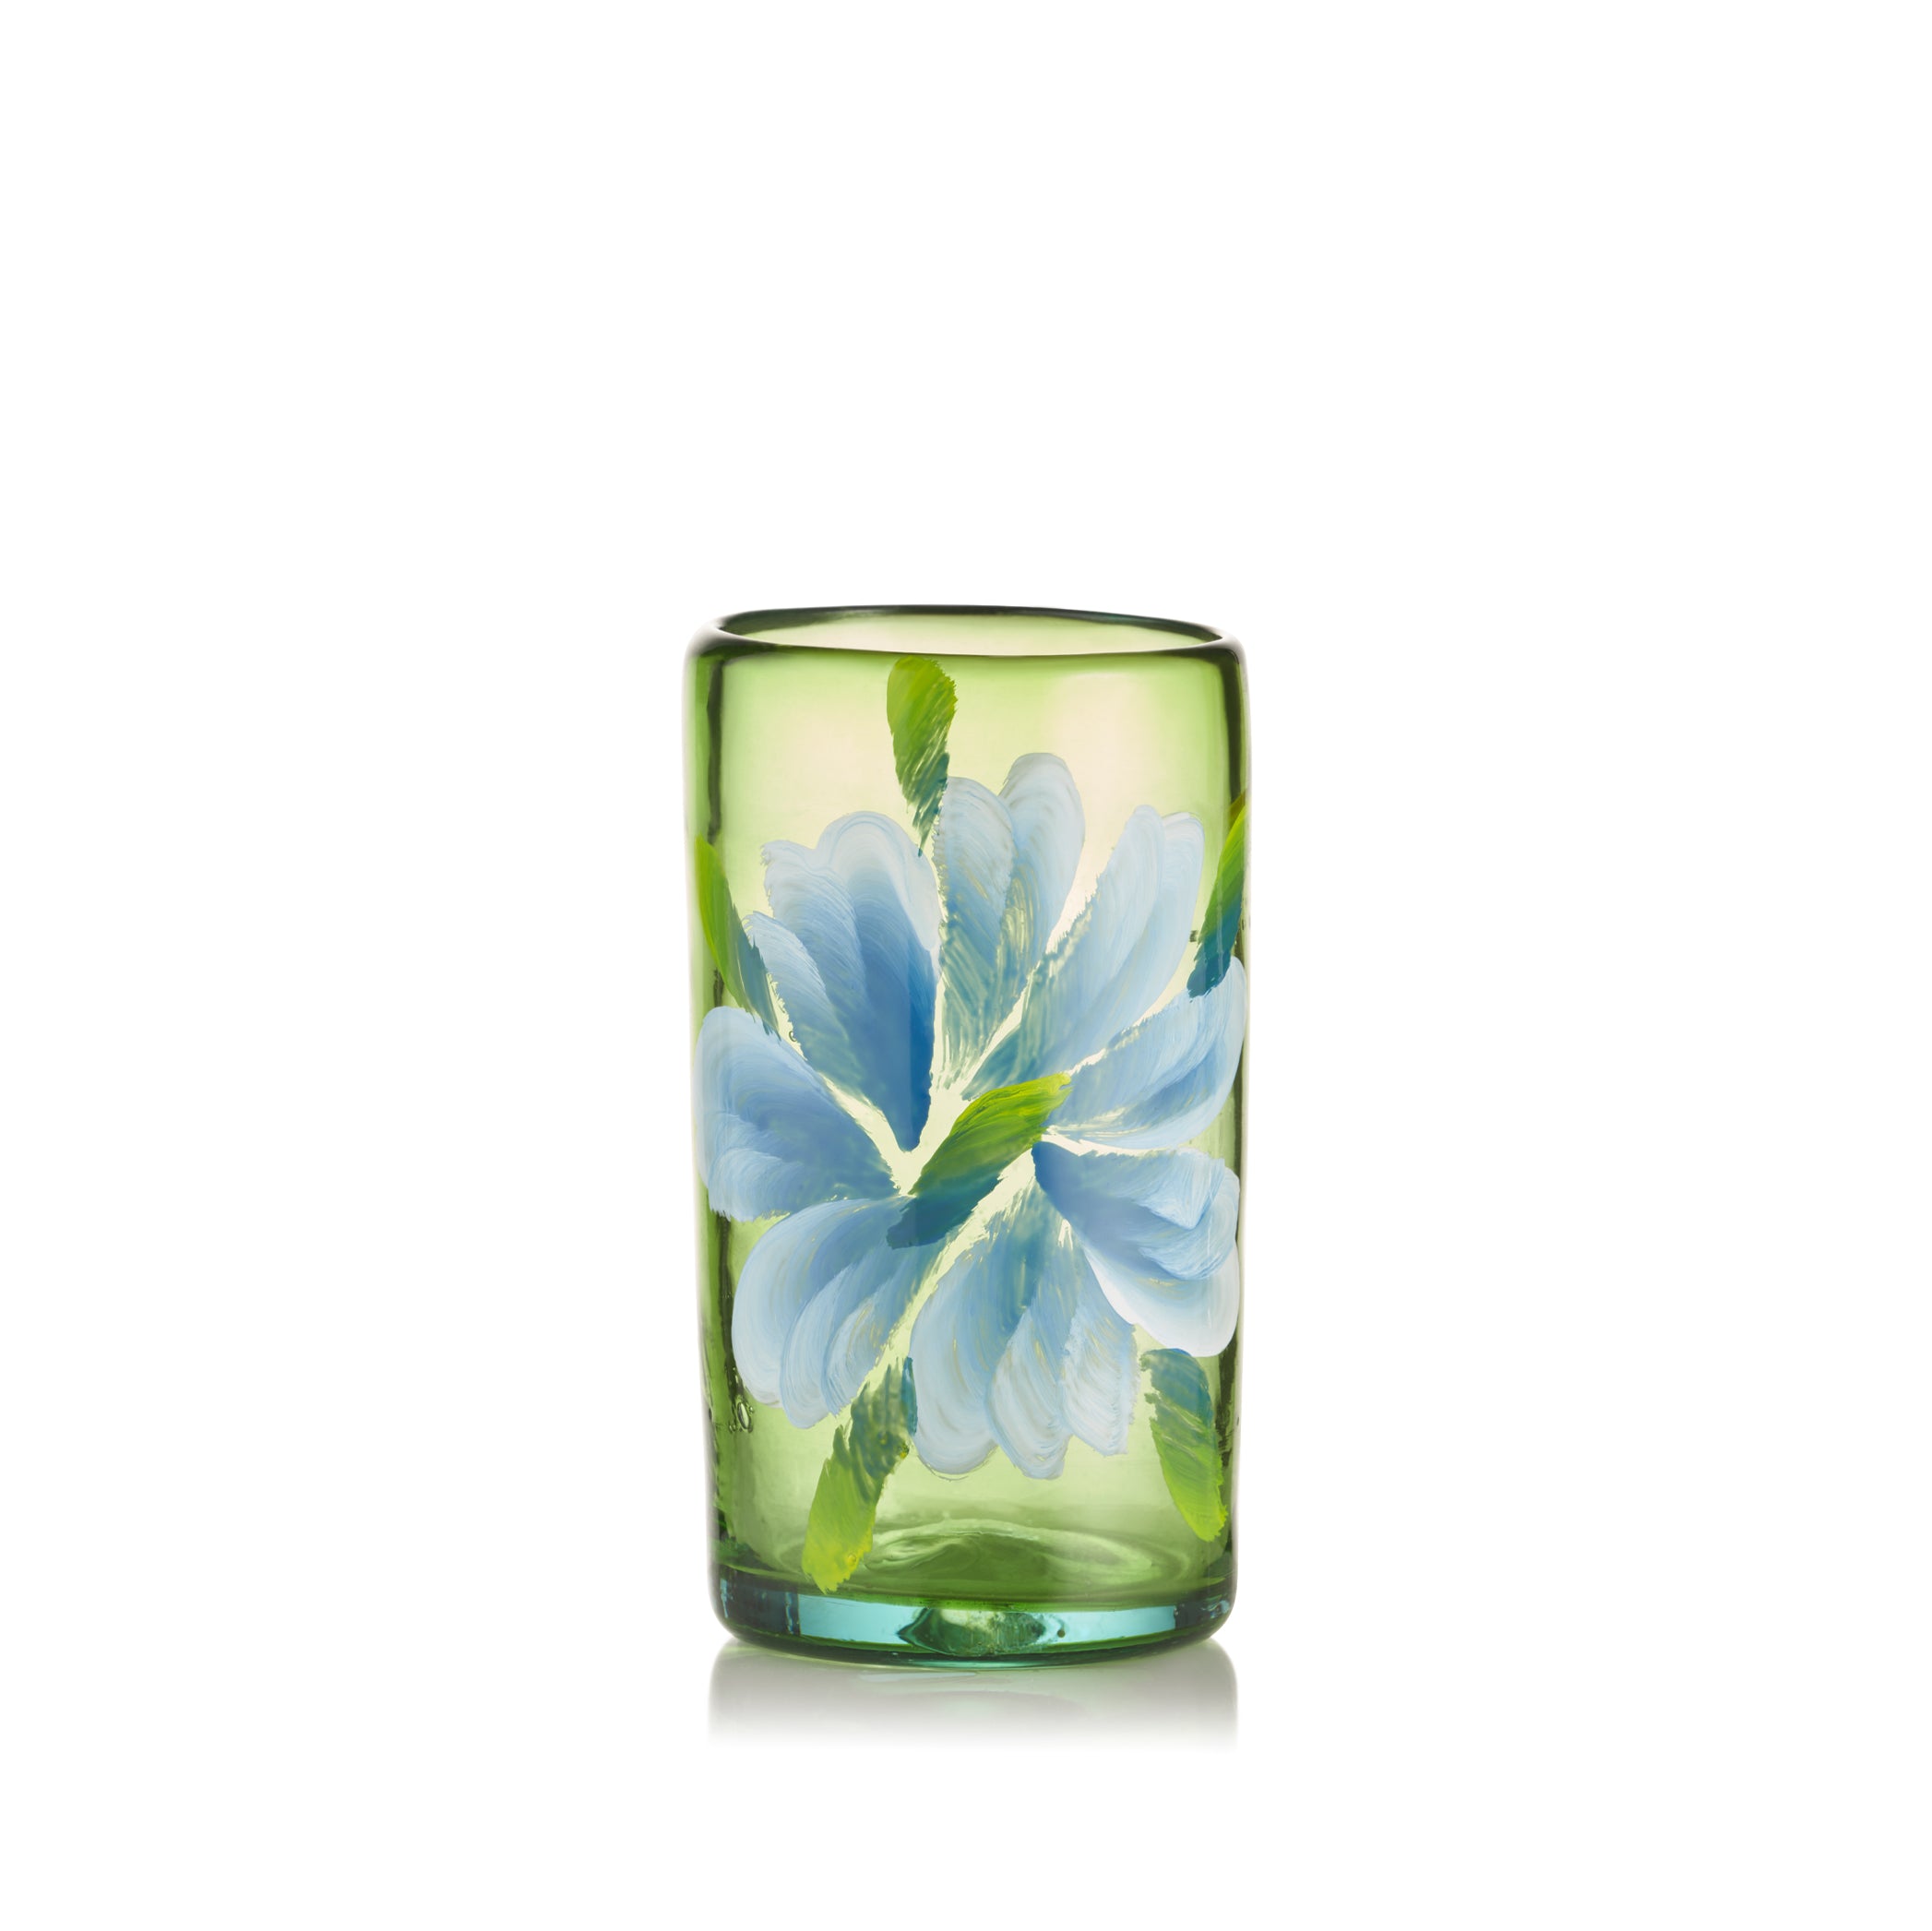 Blue Flower Hand-painted Glass, 12cm